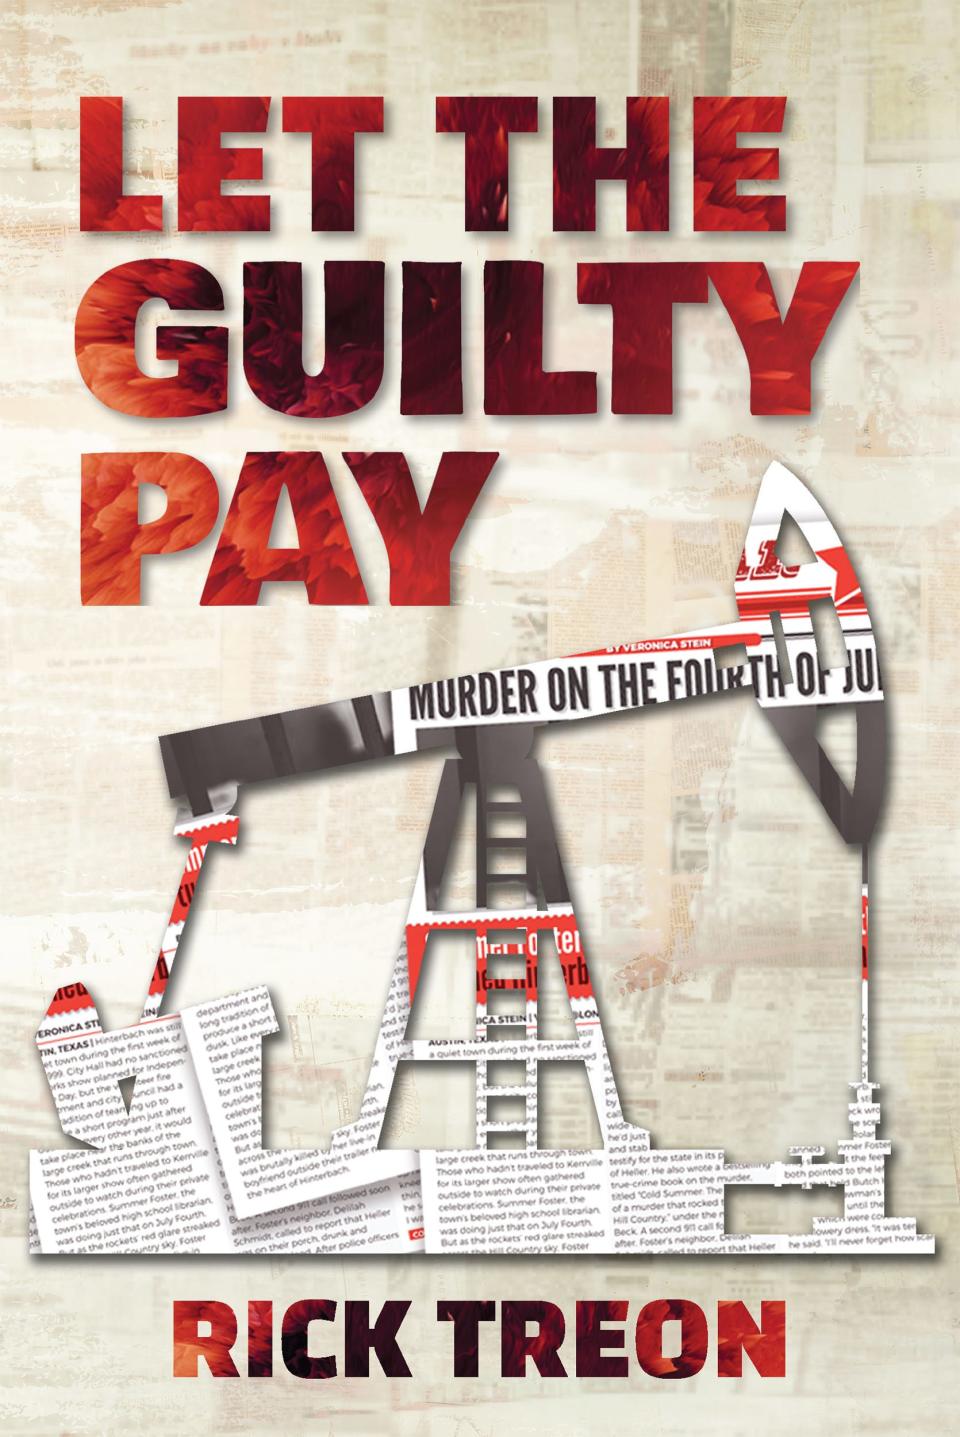 "Let the Guilty Pay" by Rick Treon